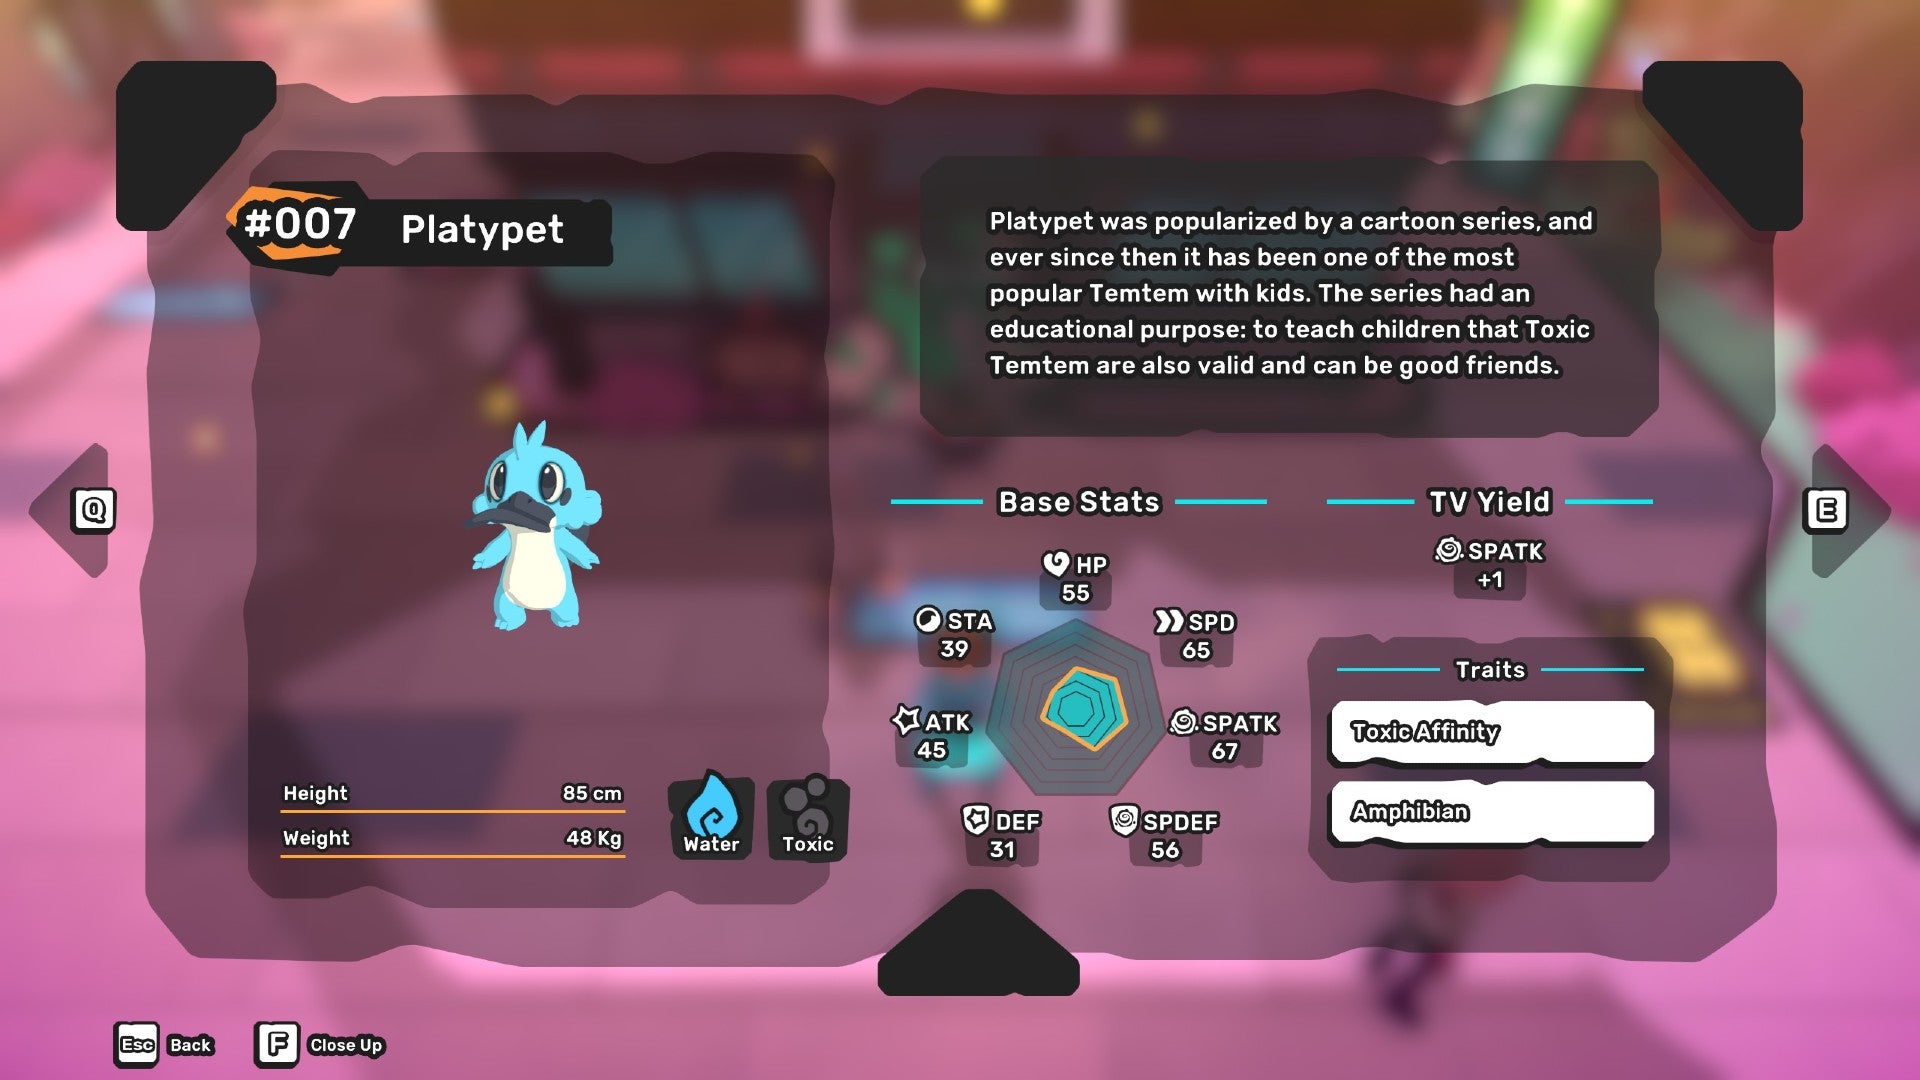 Temtem screenshot showing the Tempedia entry for Platypet, the blue duck on the left.